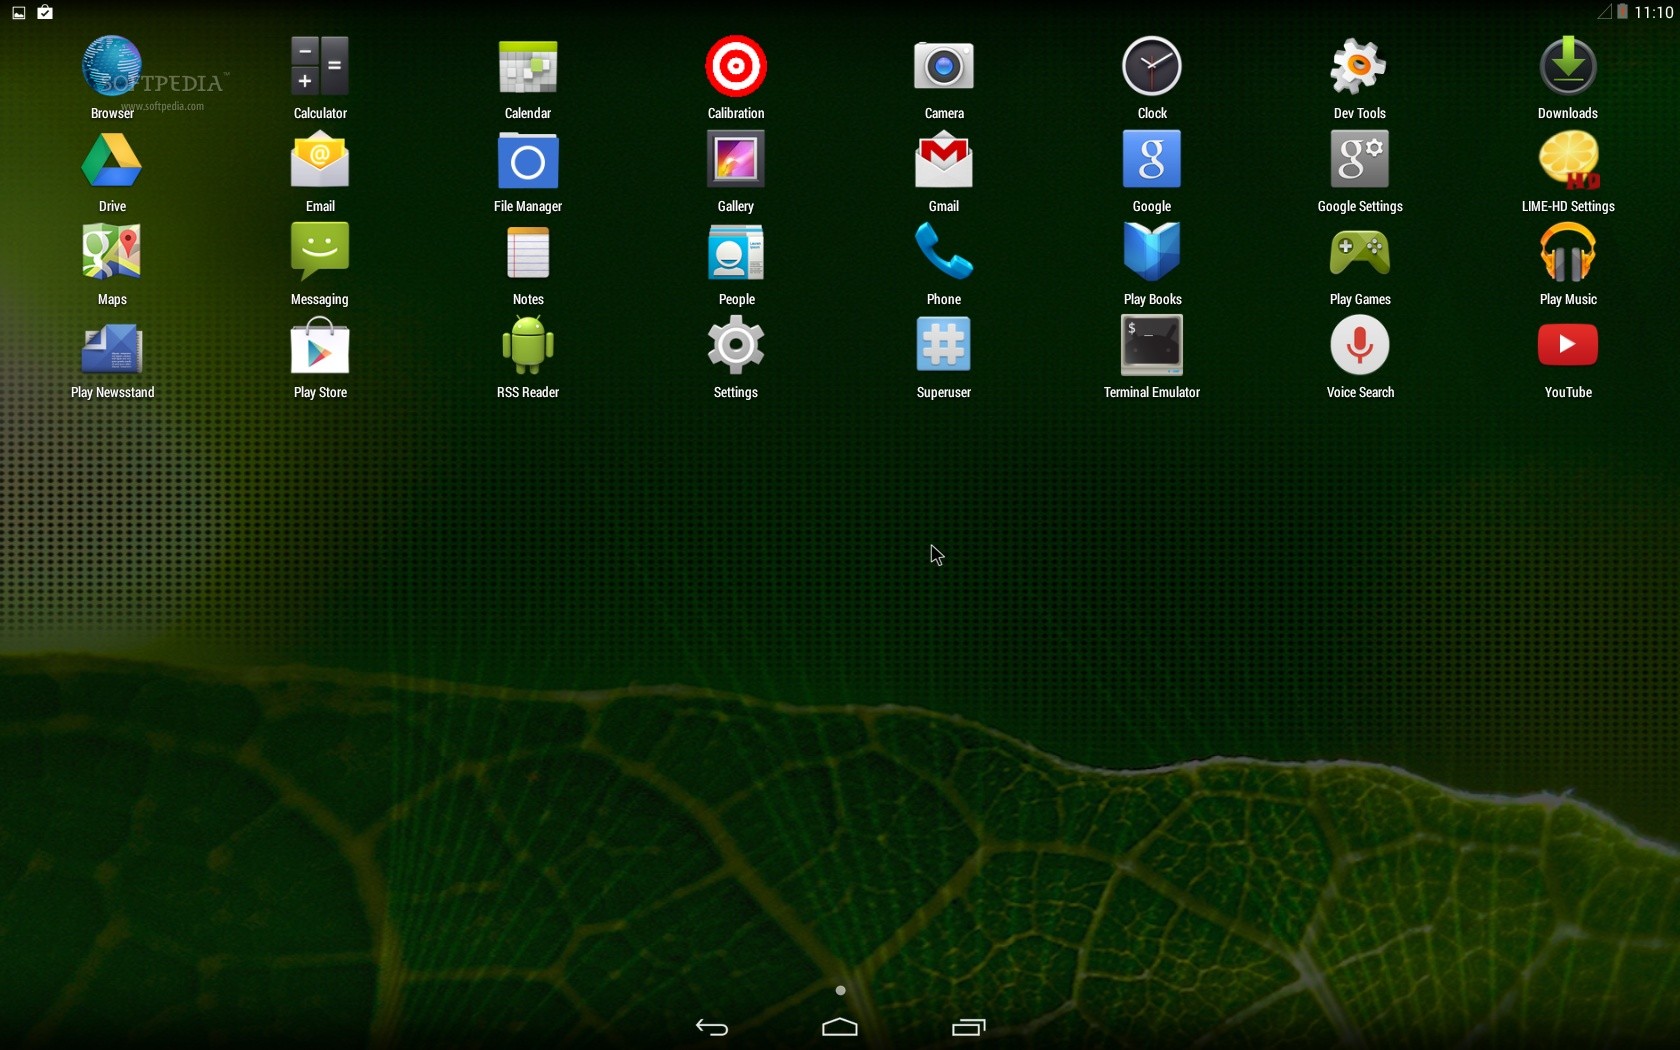 Android-x86 4.4 KitKat Is a Linux OS for PCs Based on Google's Android